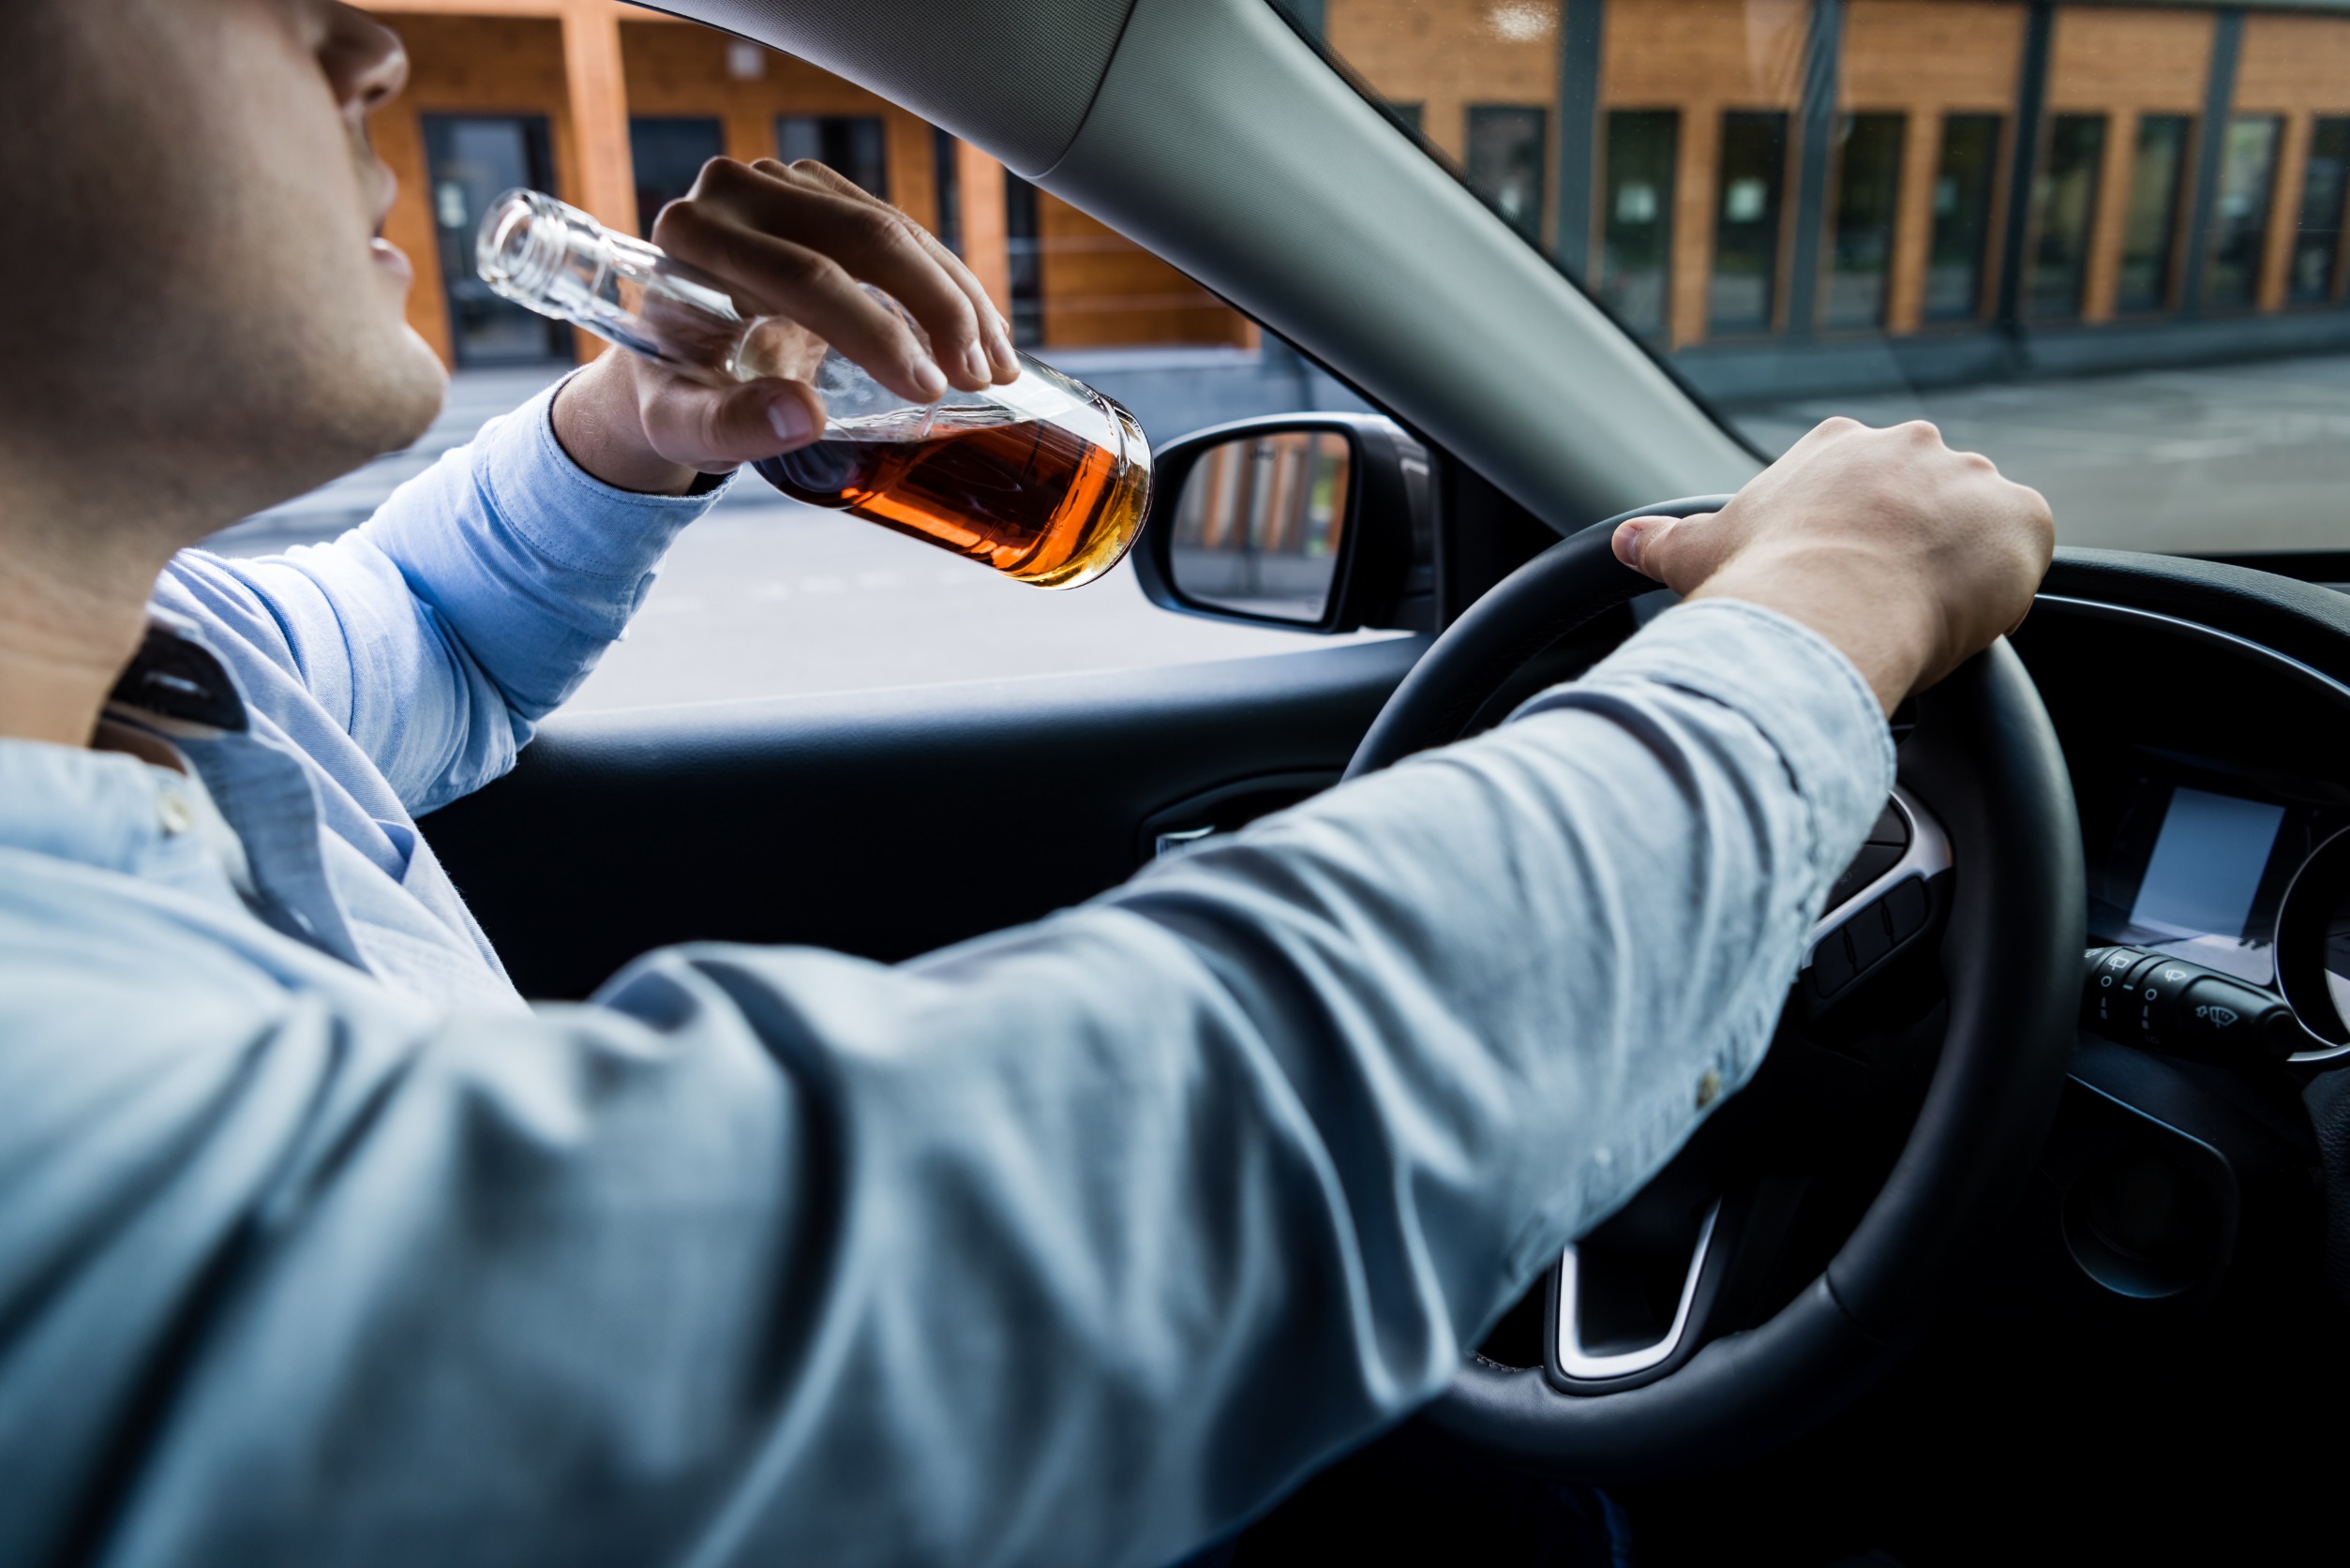 USDOT urges to being rule making on impaired driving prevention technology